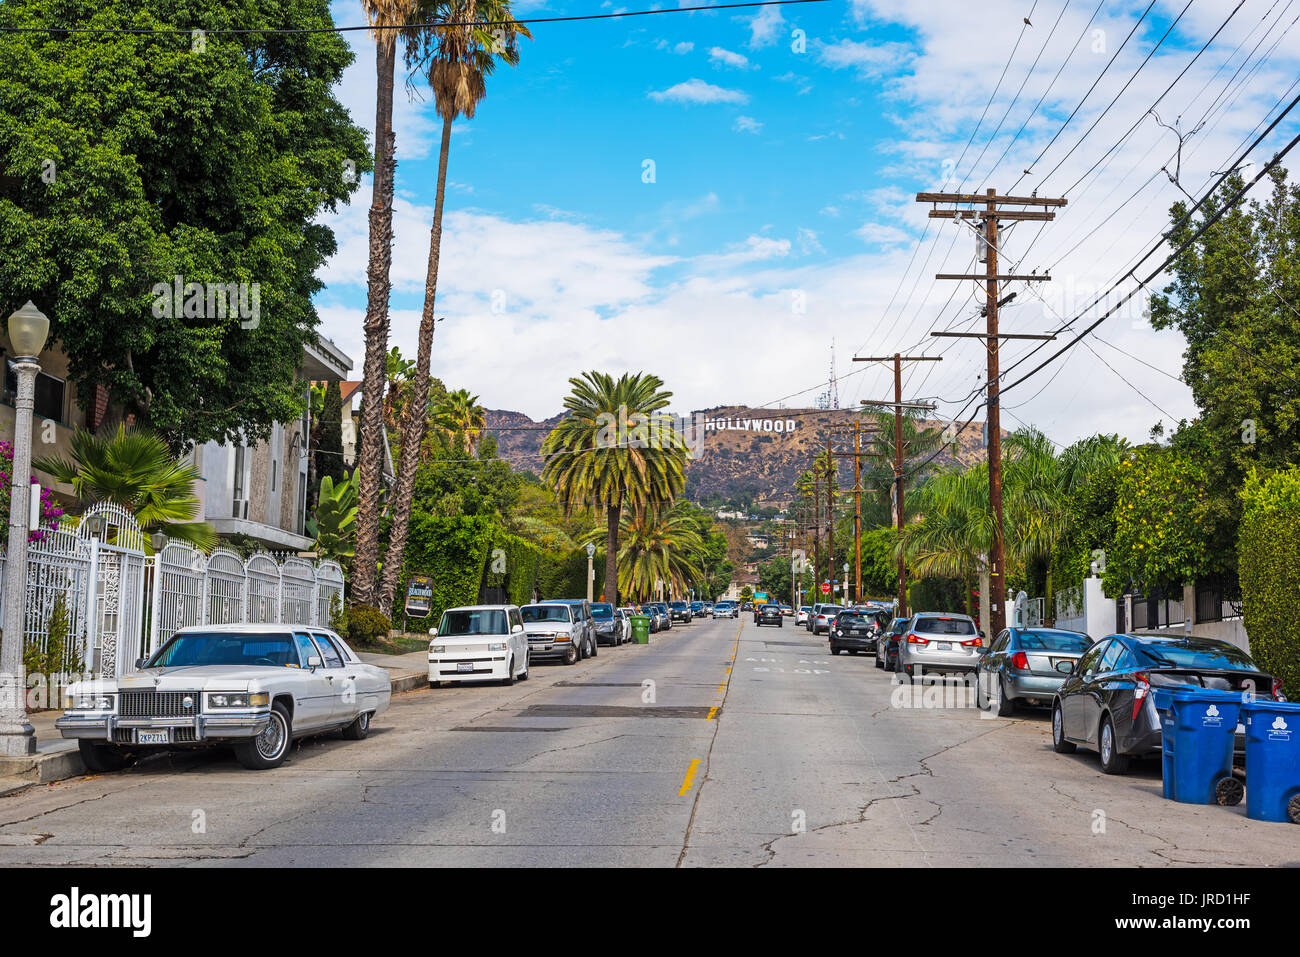 world famous Hollywood sign in Los Angeles Stock Photo